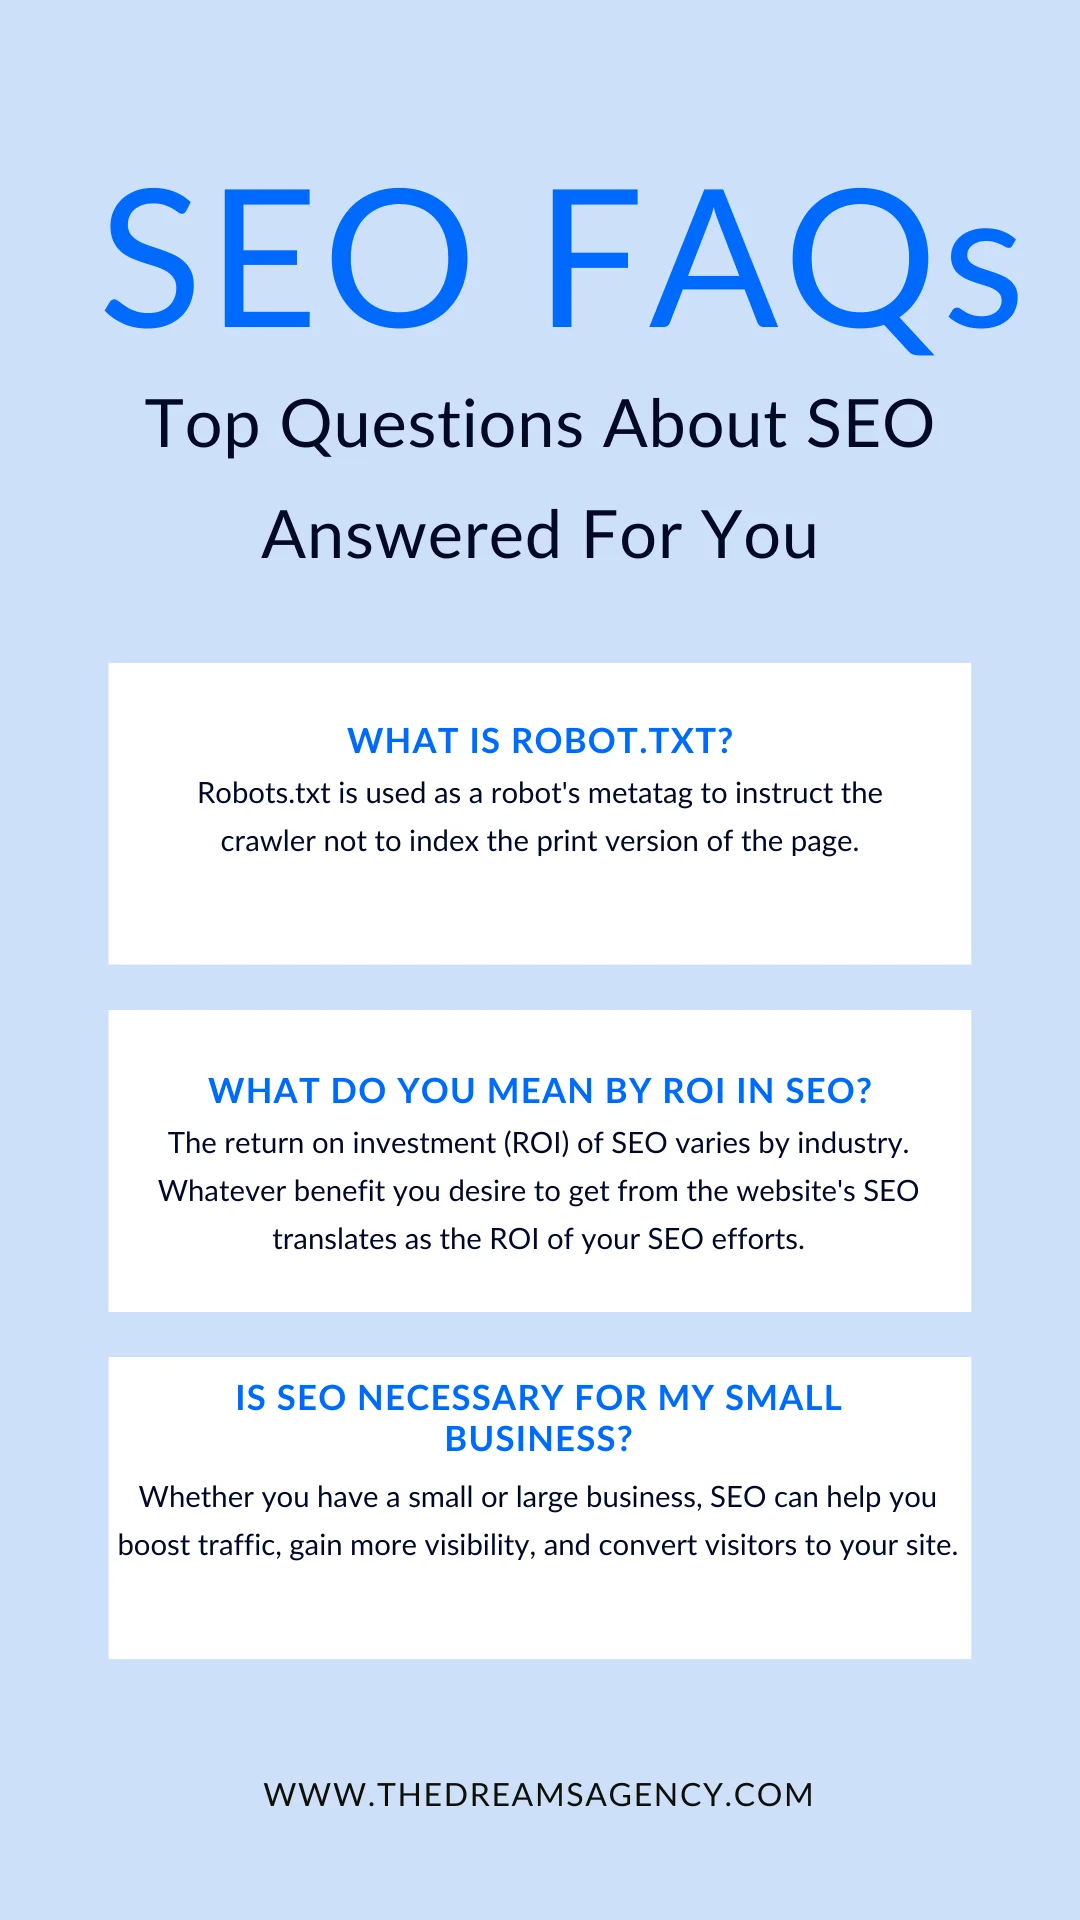 An infographic on the top questions about seo and their answers